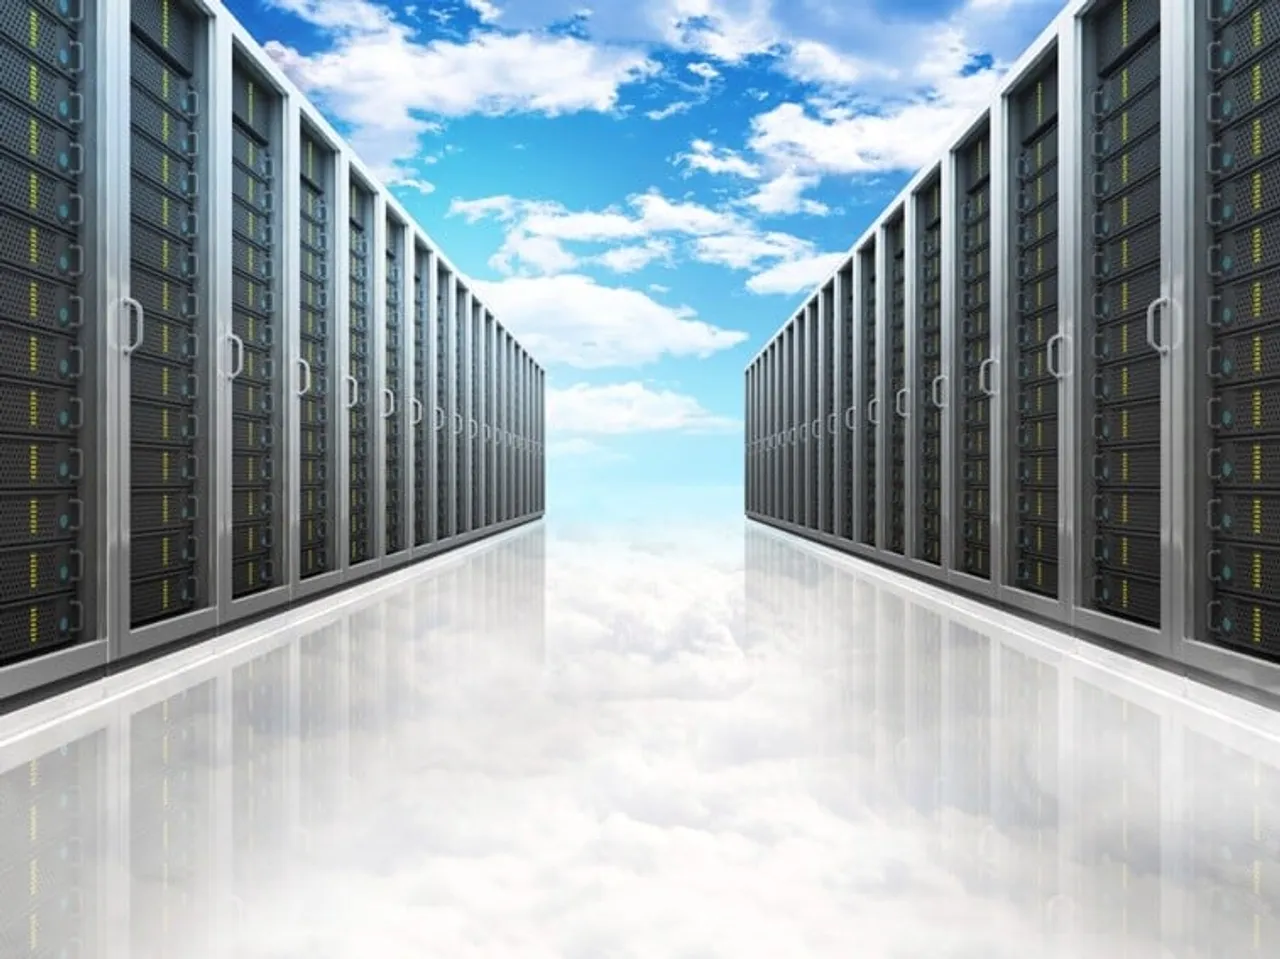 India poised to be next data centre destination; likely to grow 2X times by FY25